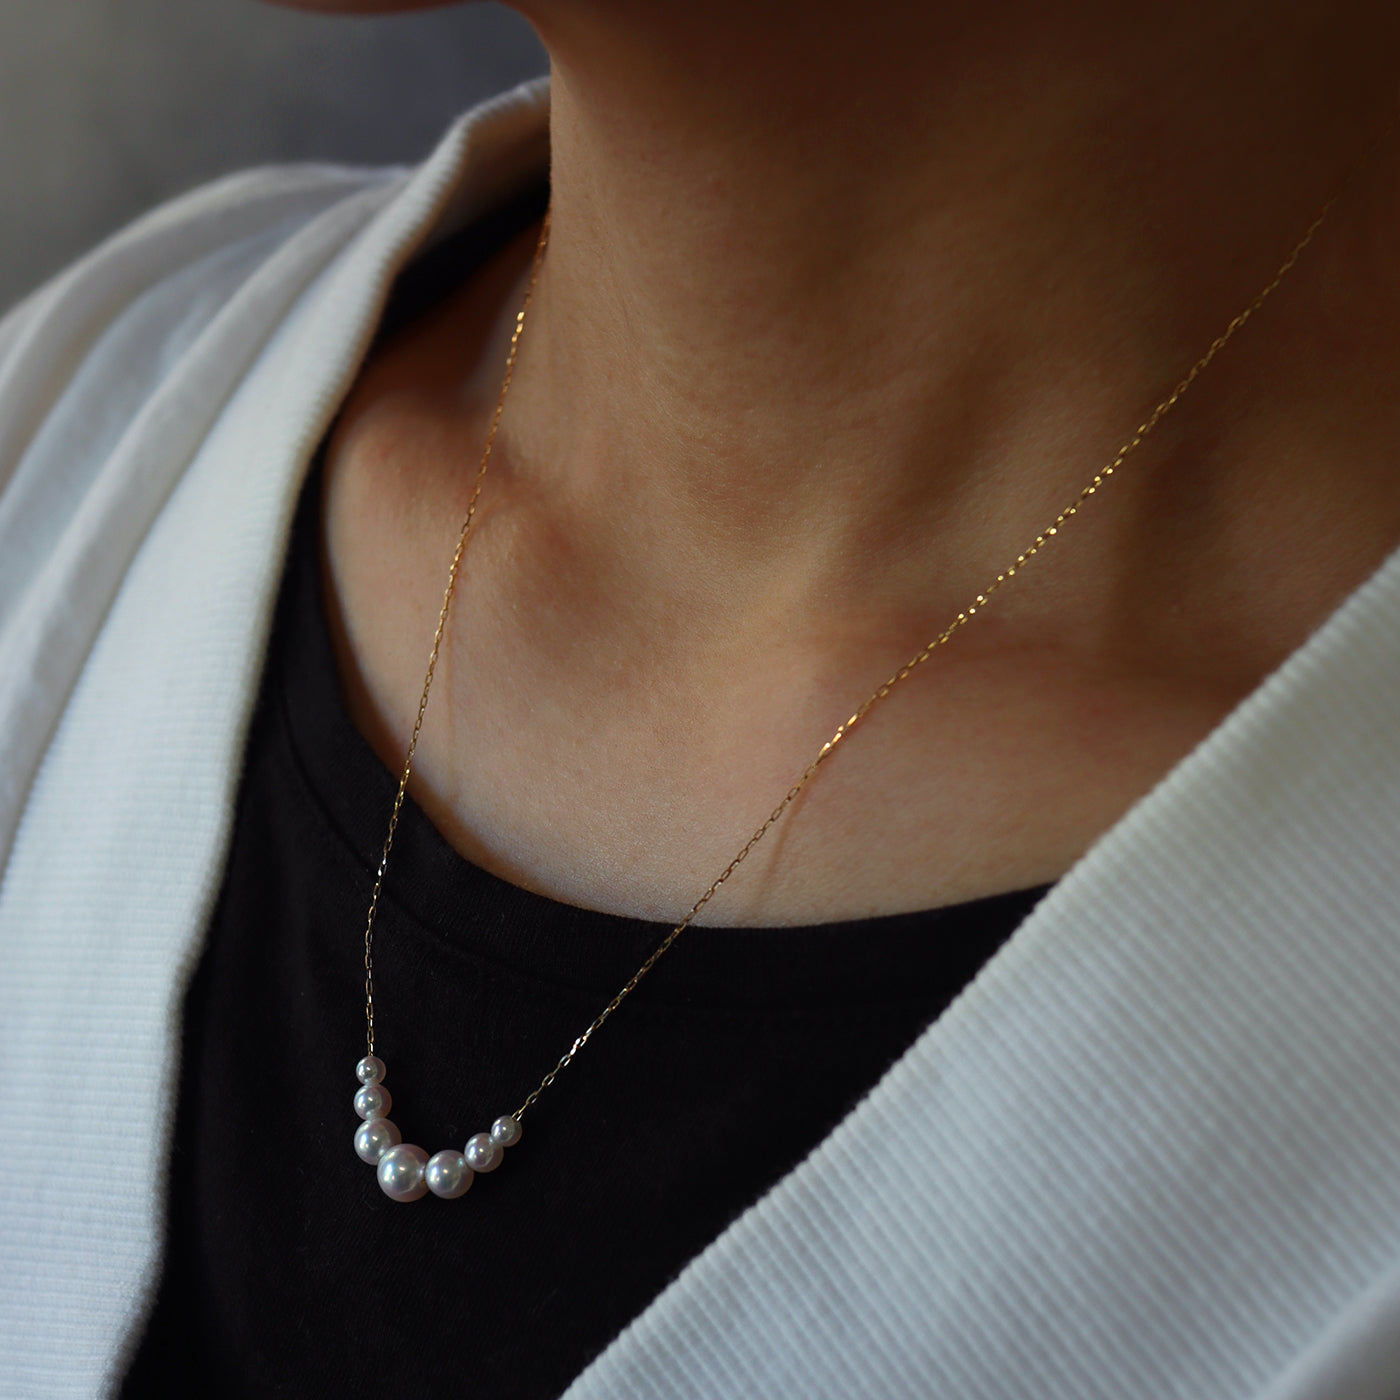 Graduated Pearl Chain Necklace - Akoya Pearl